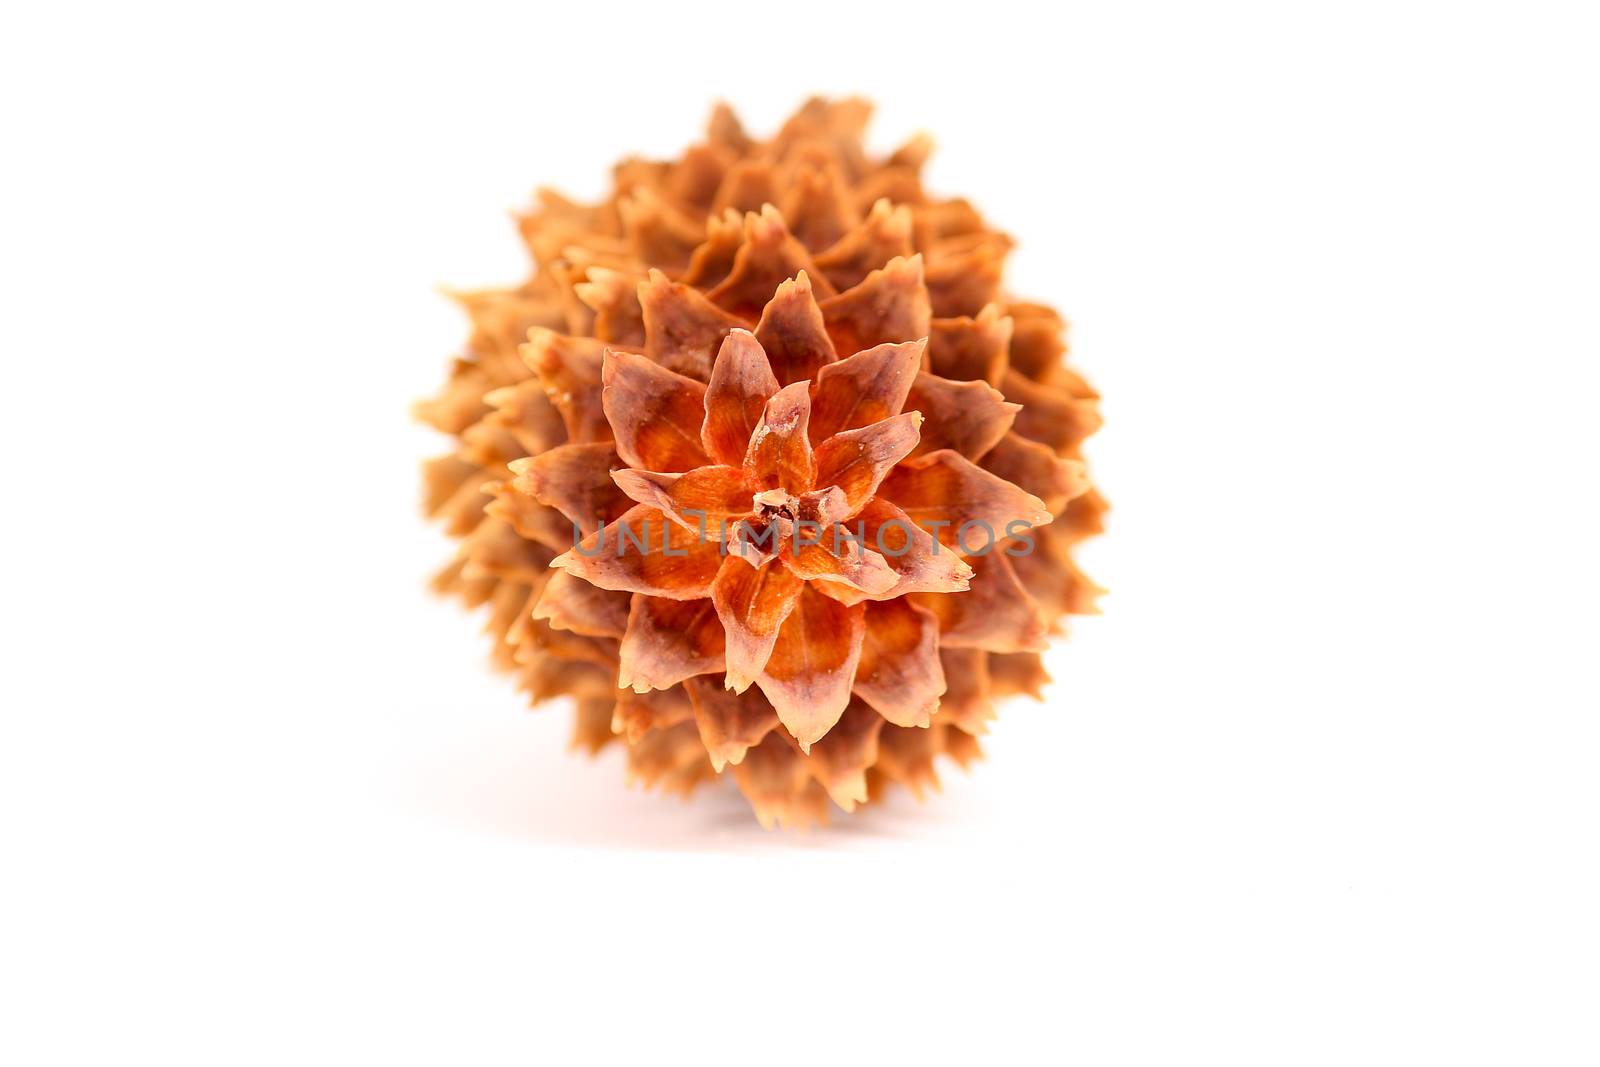 Shallow focus on a pine cone tip by shoricelu